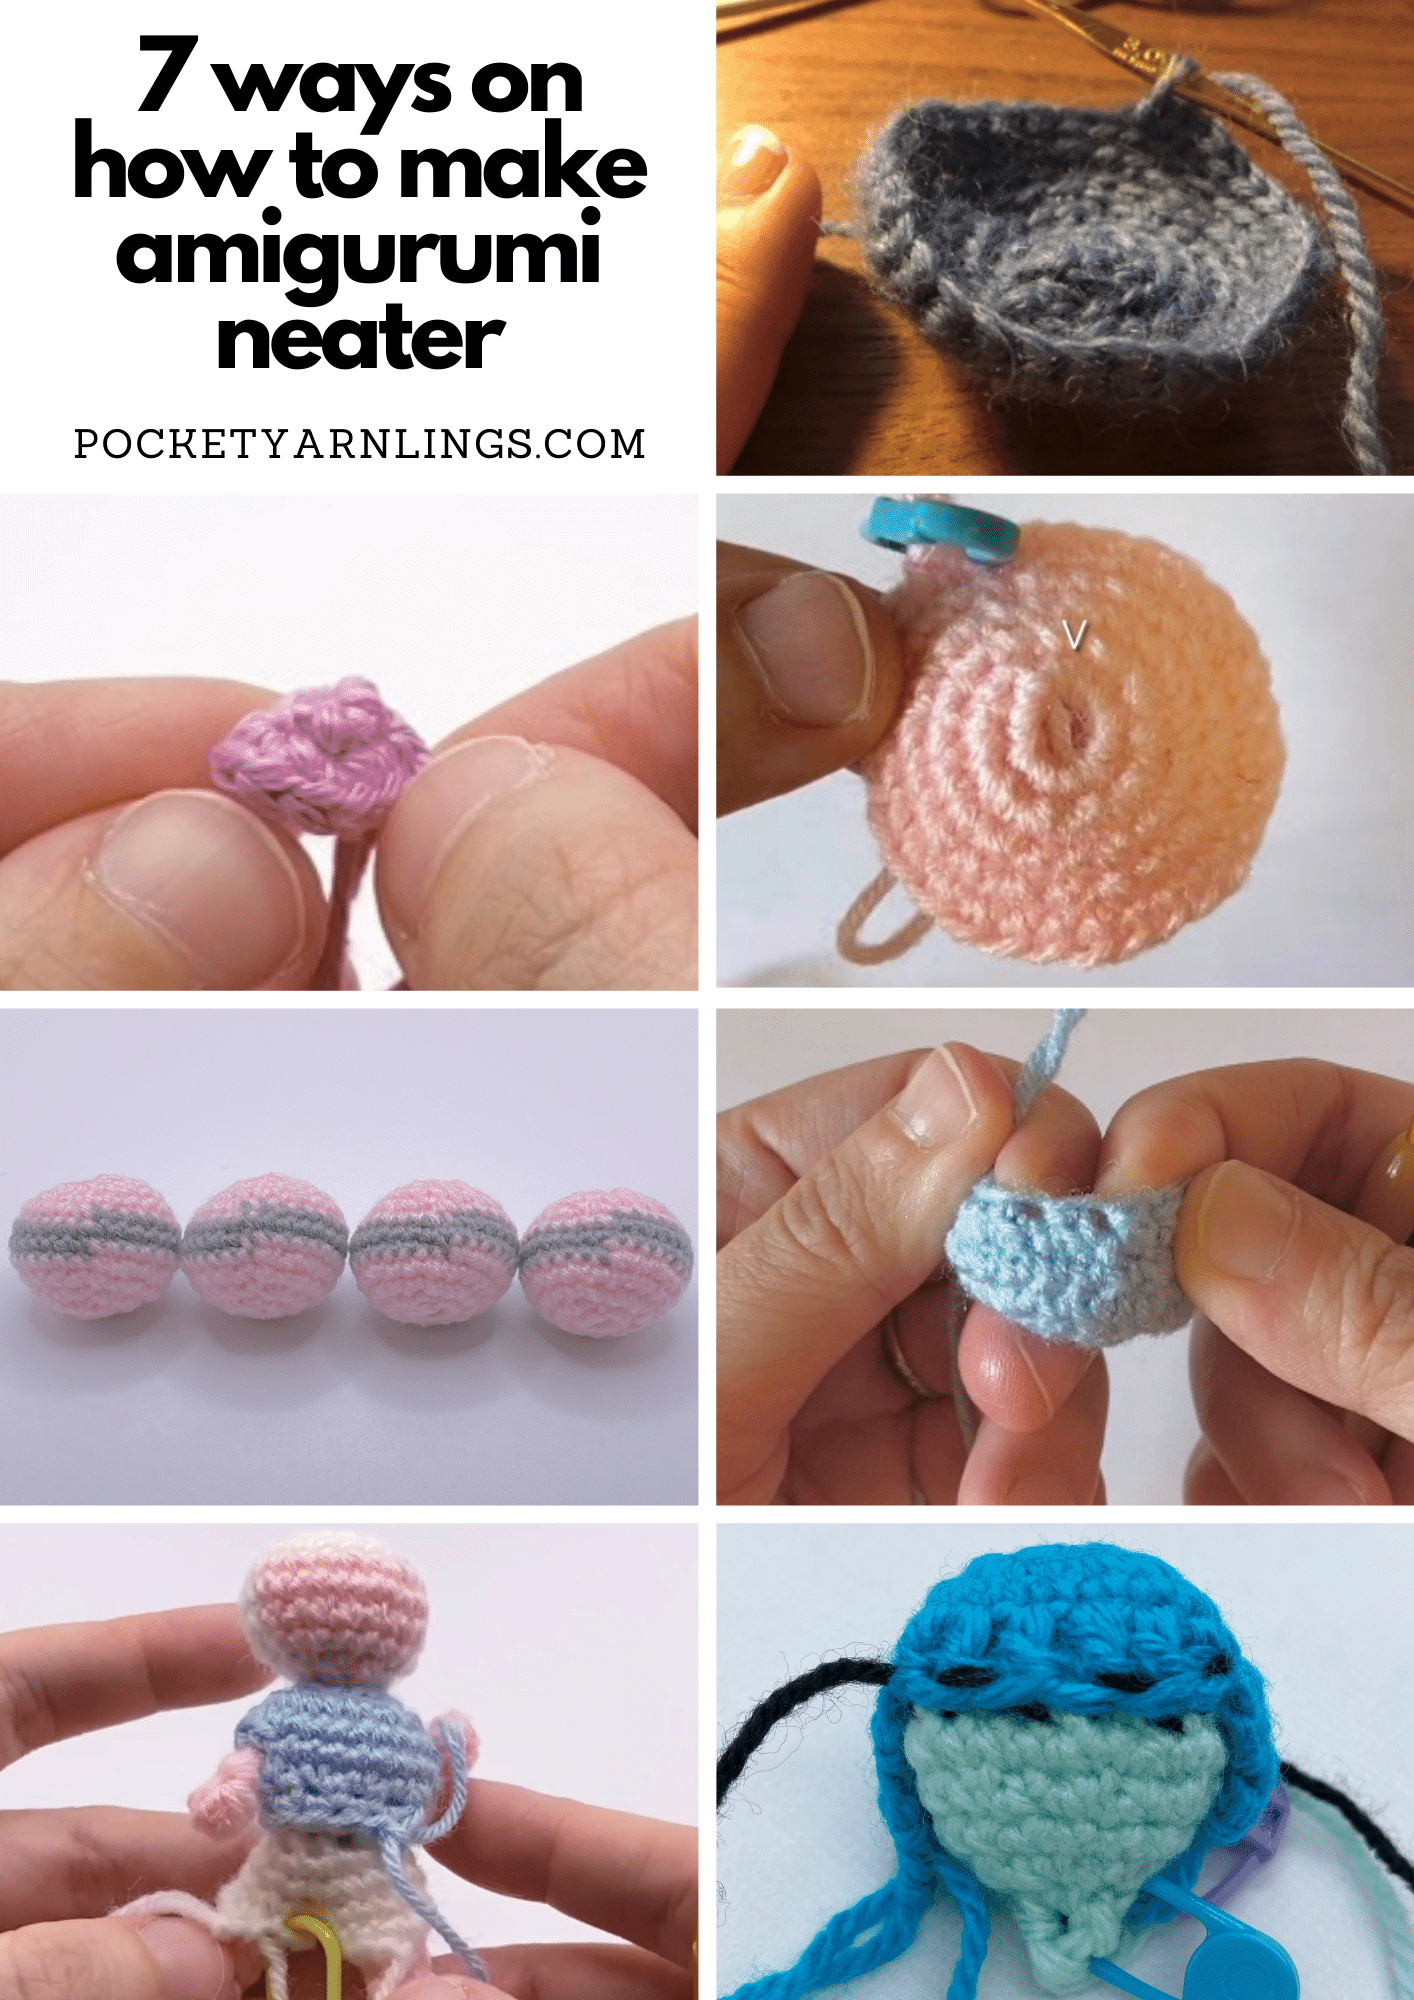 Creating Beautiful Things in Life: How to properly size crochet